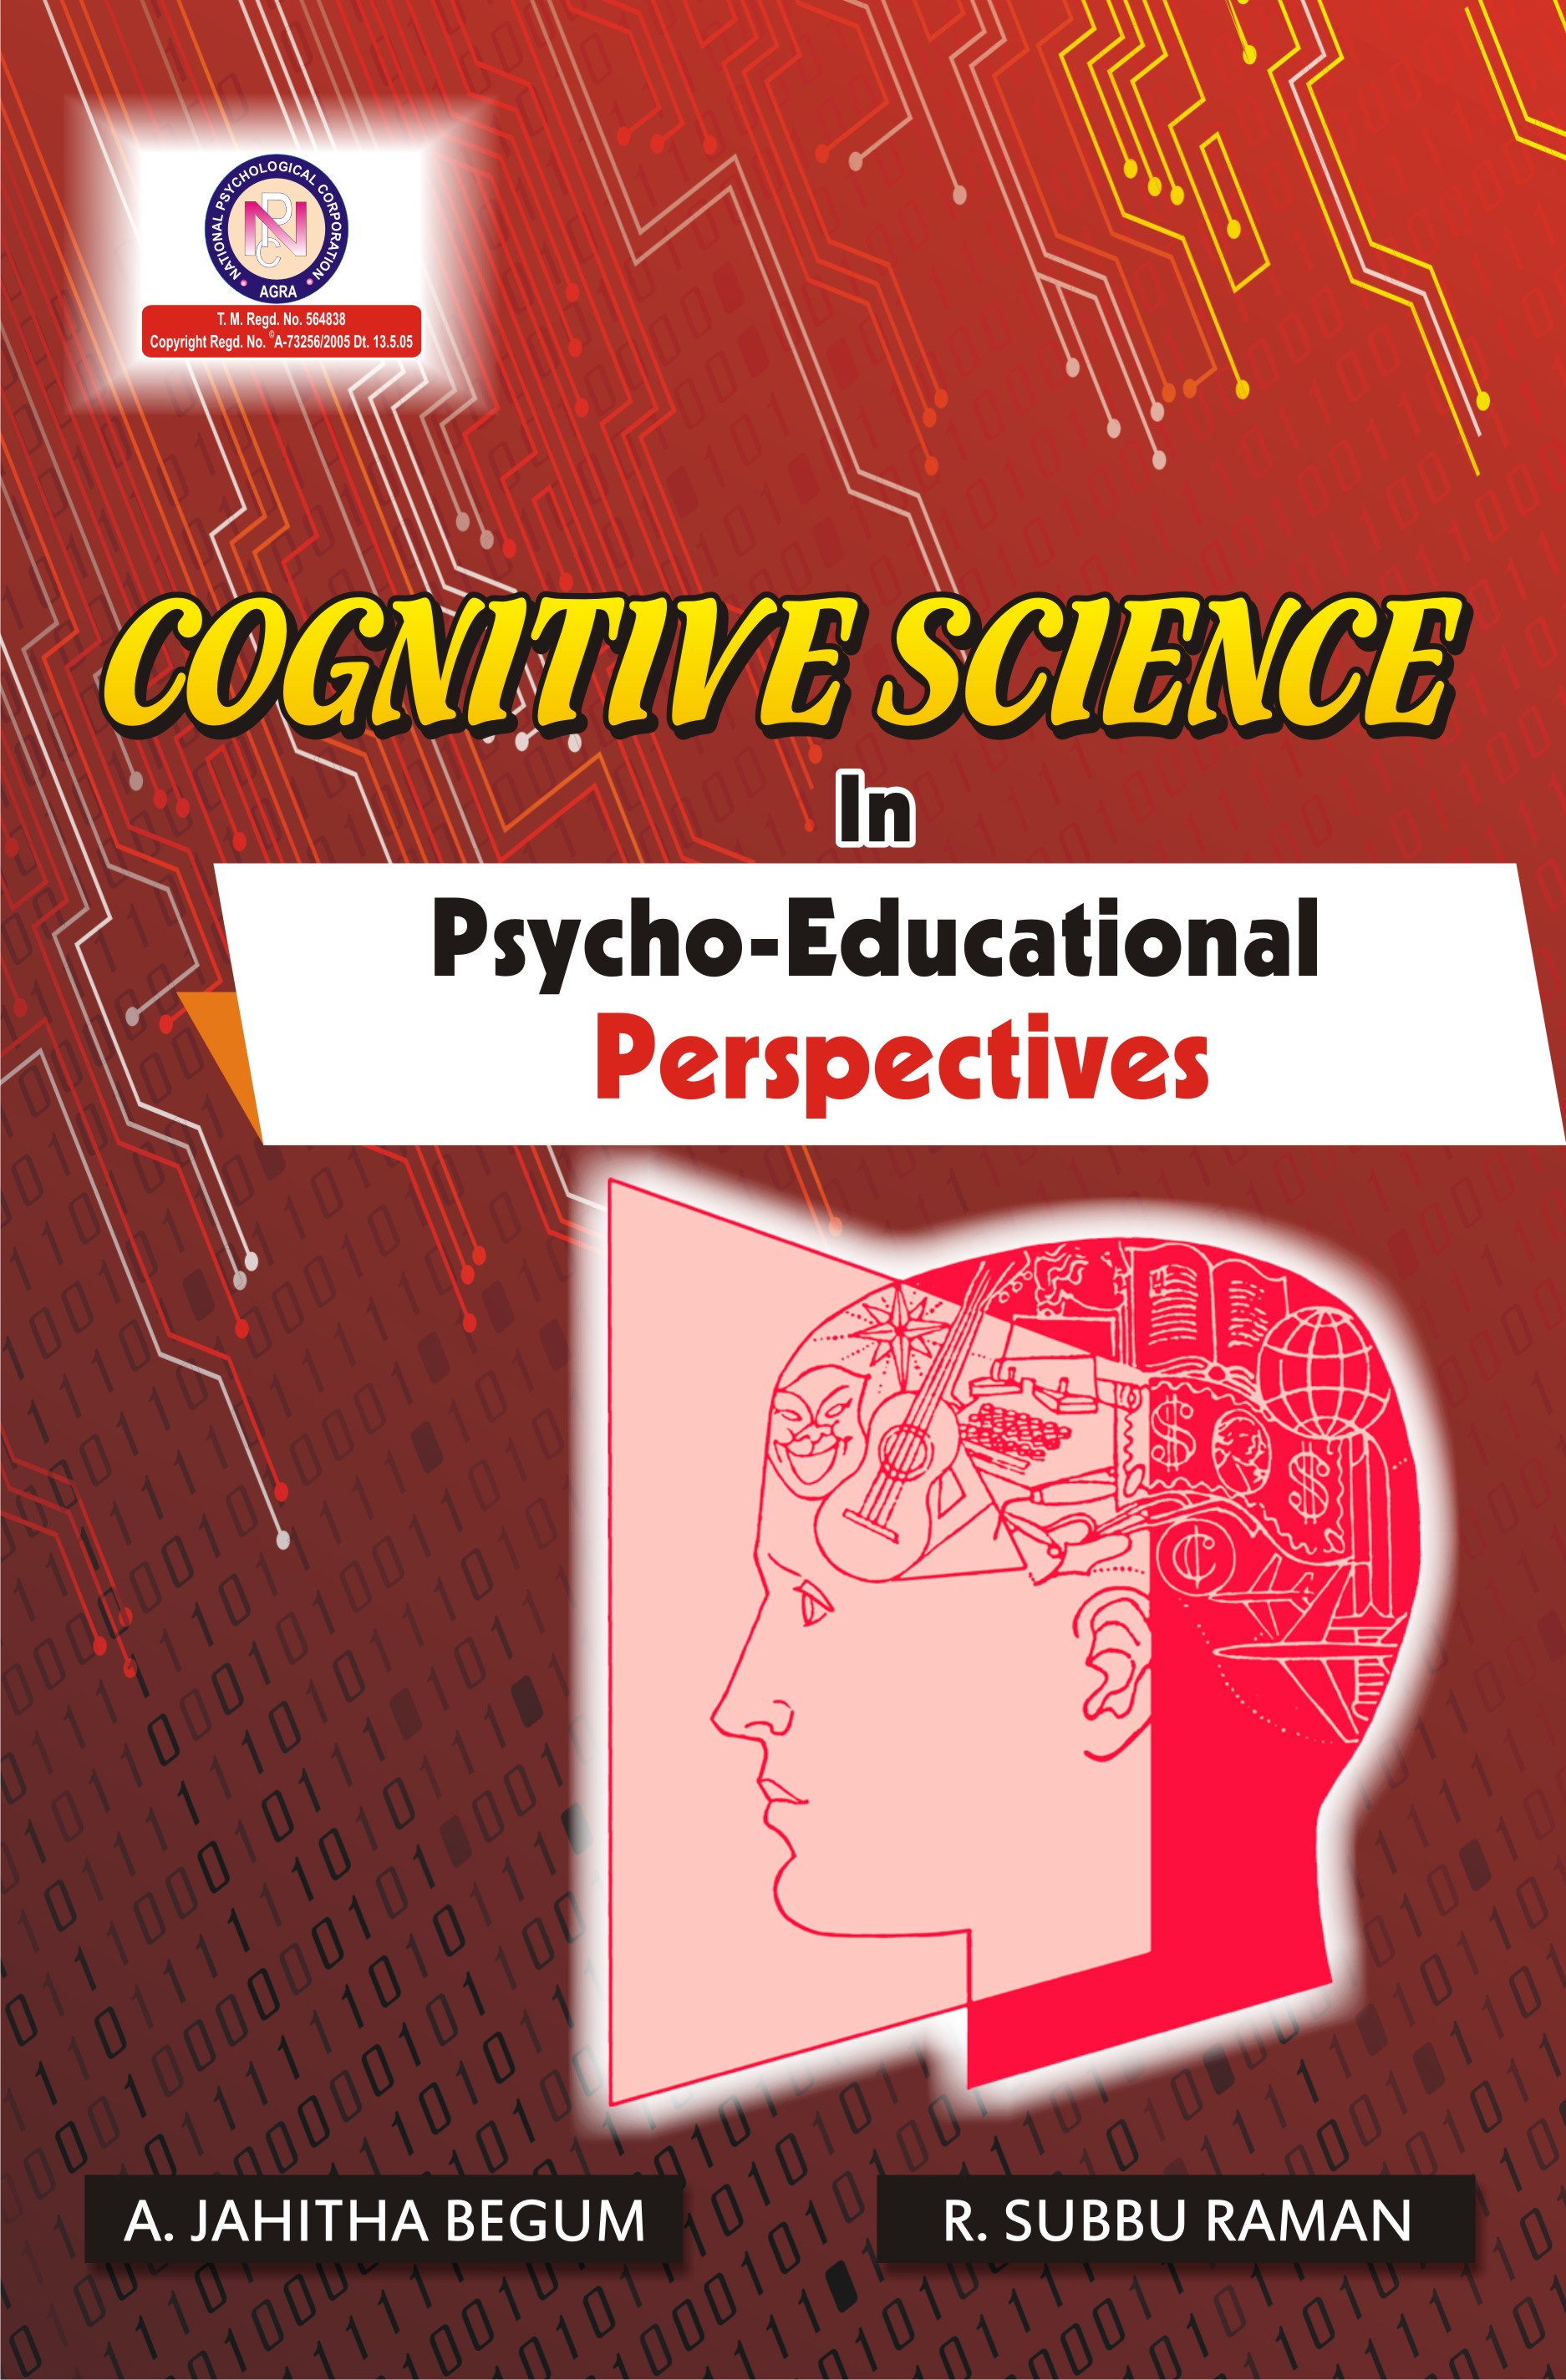 COGNITIVE-SCIENCE-IN-PSYCHO-EDUCATIONAL-PERSPECTIVES